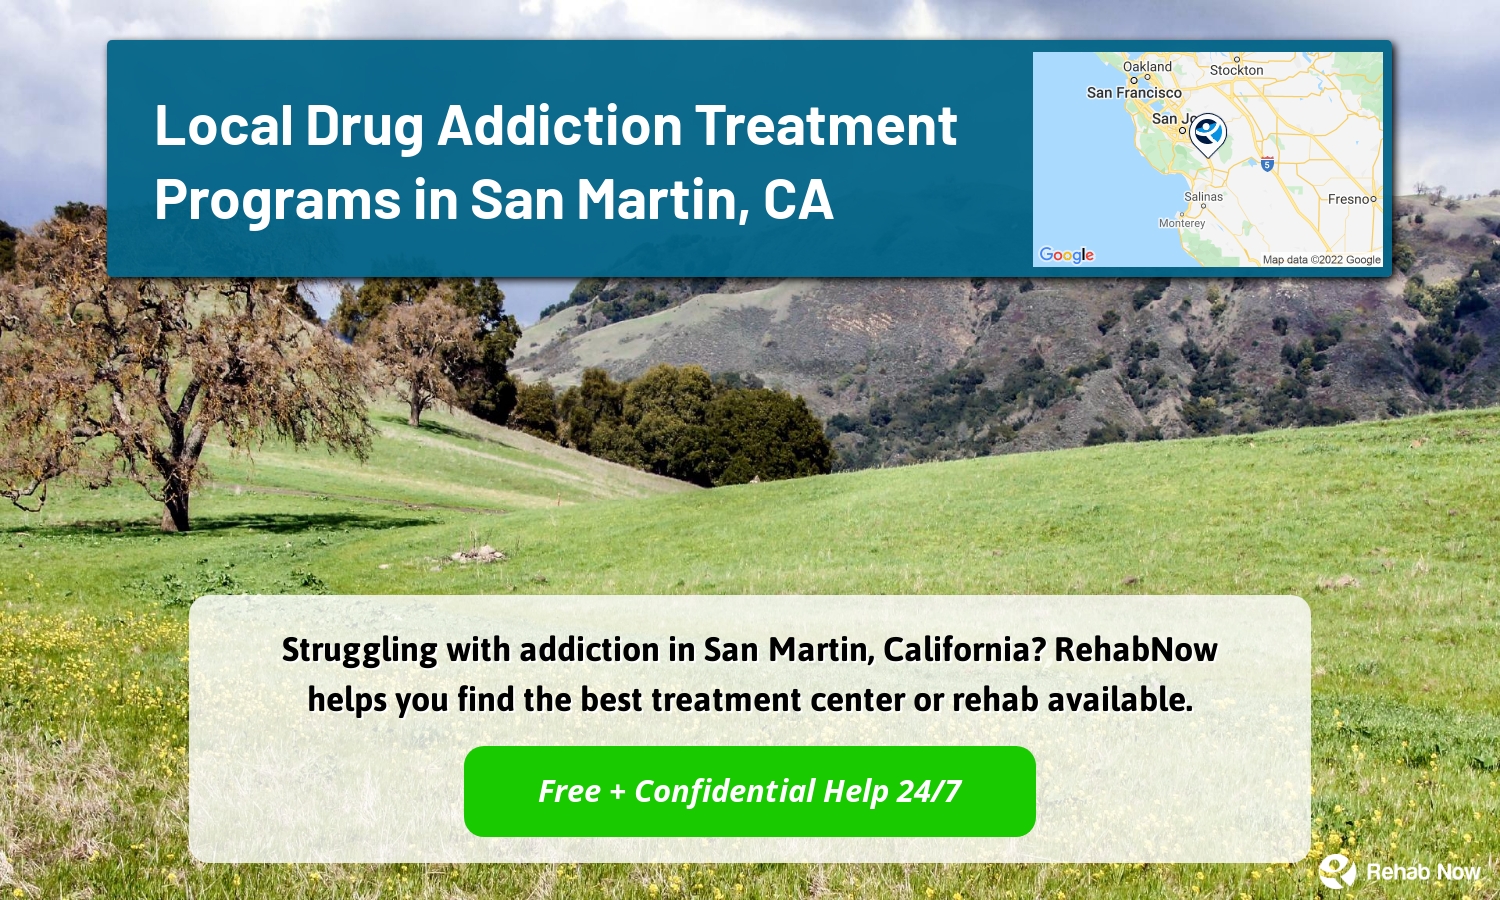 Struggling with addiction in San Martin, California? RehabNow helps you find the best treatment center or rehab available.